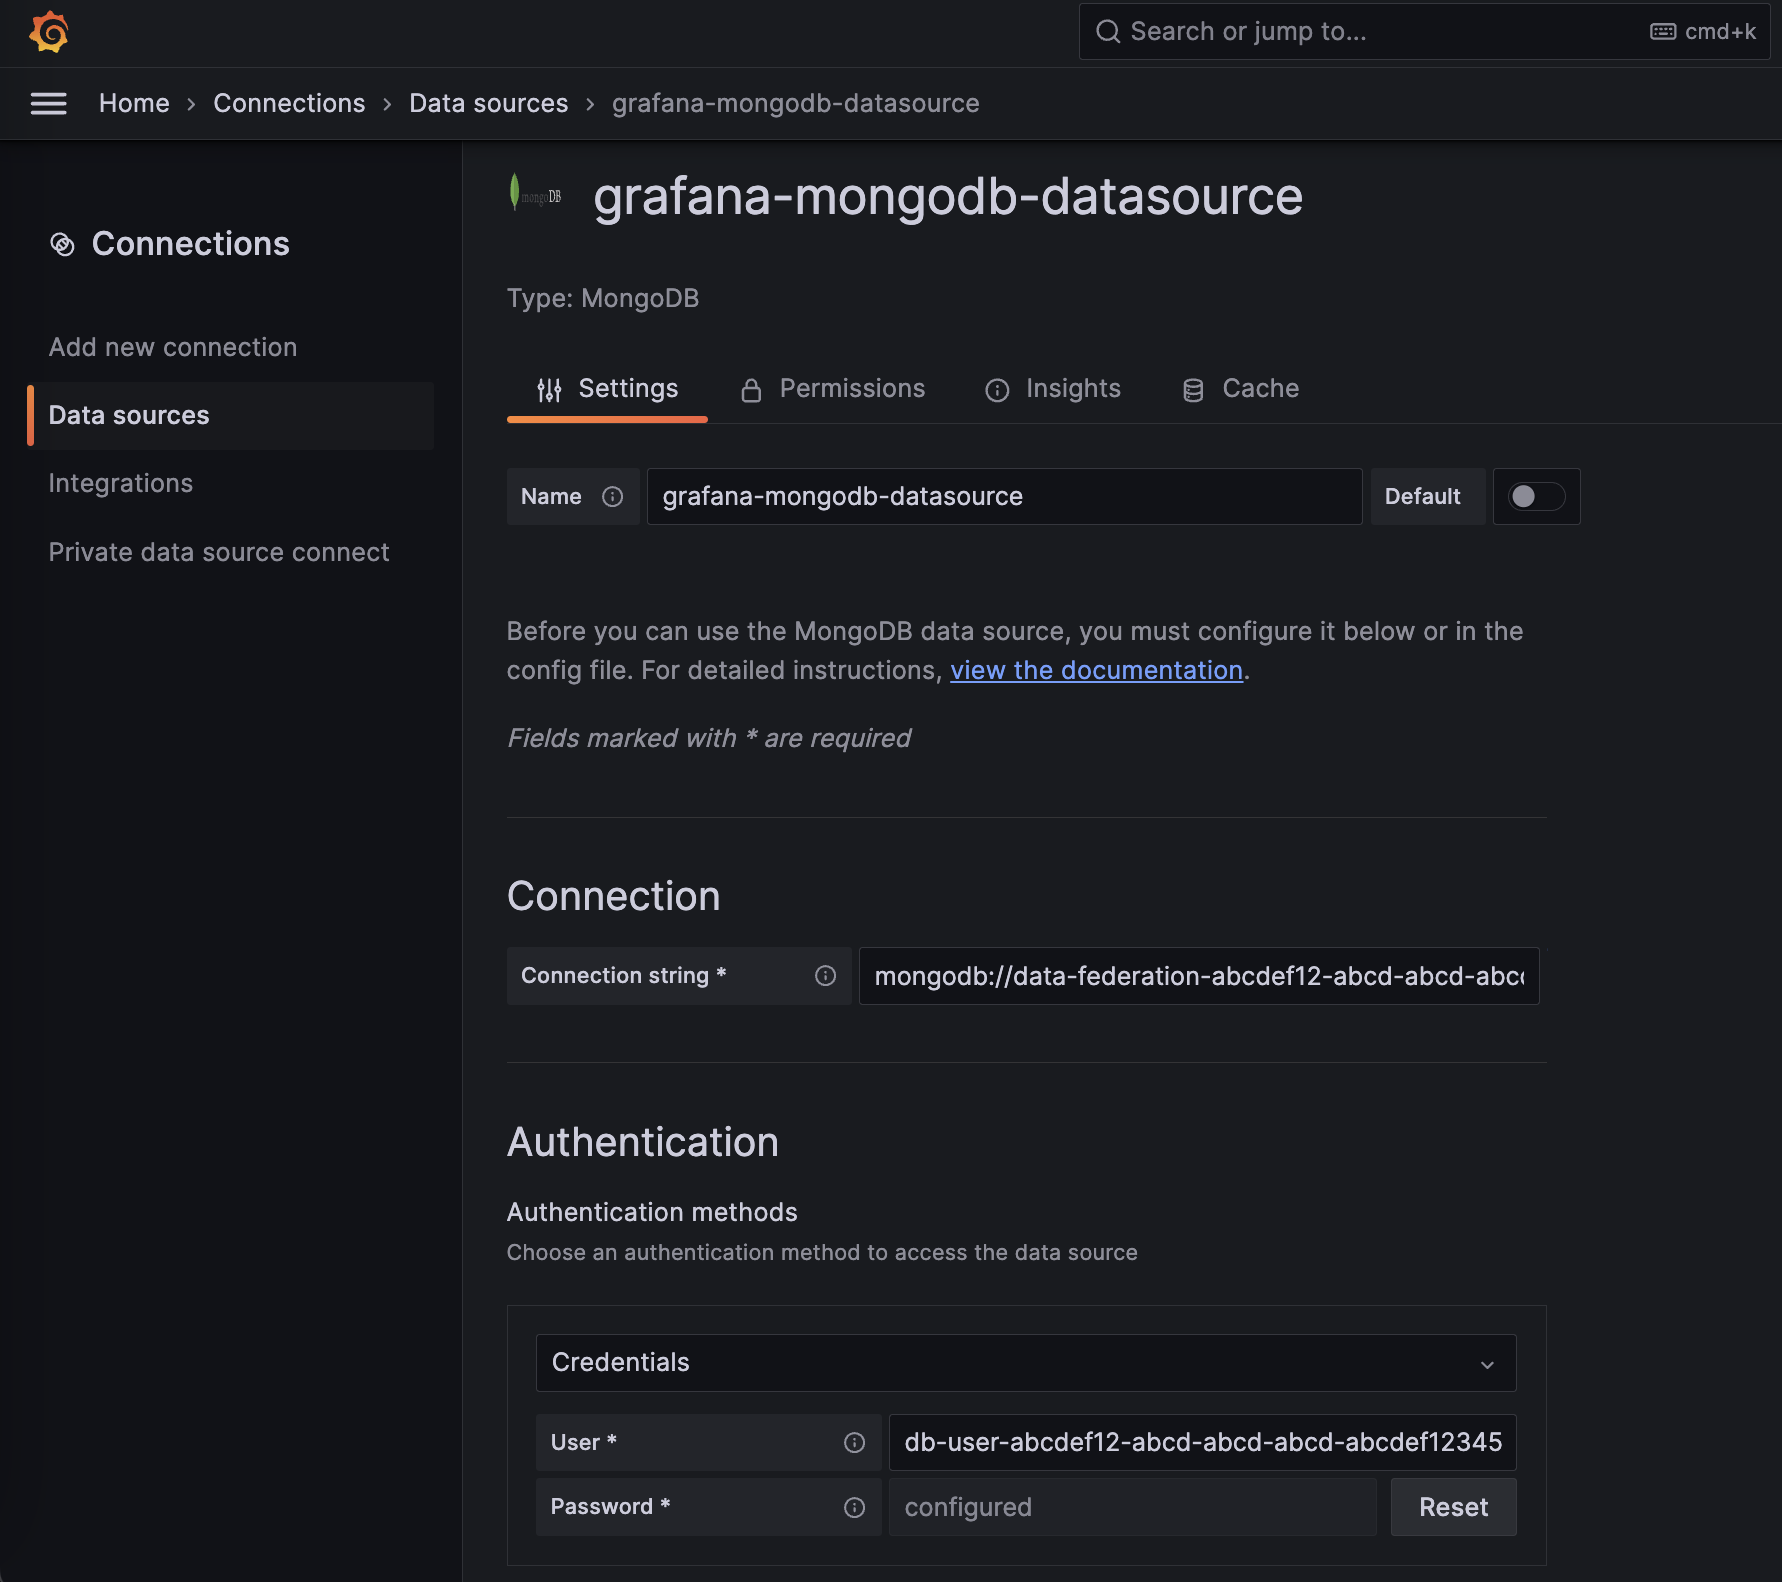 The Grafana data source plugin configuration page, showing the connection string and username filled in with the configuration determined from the previous steps